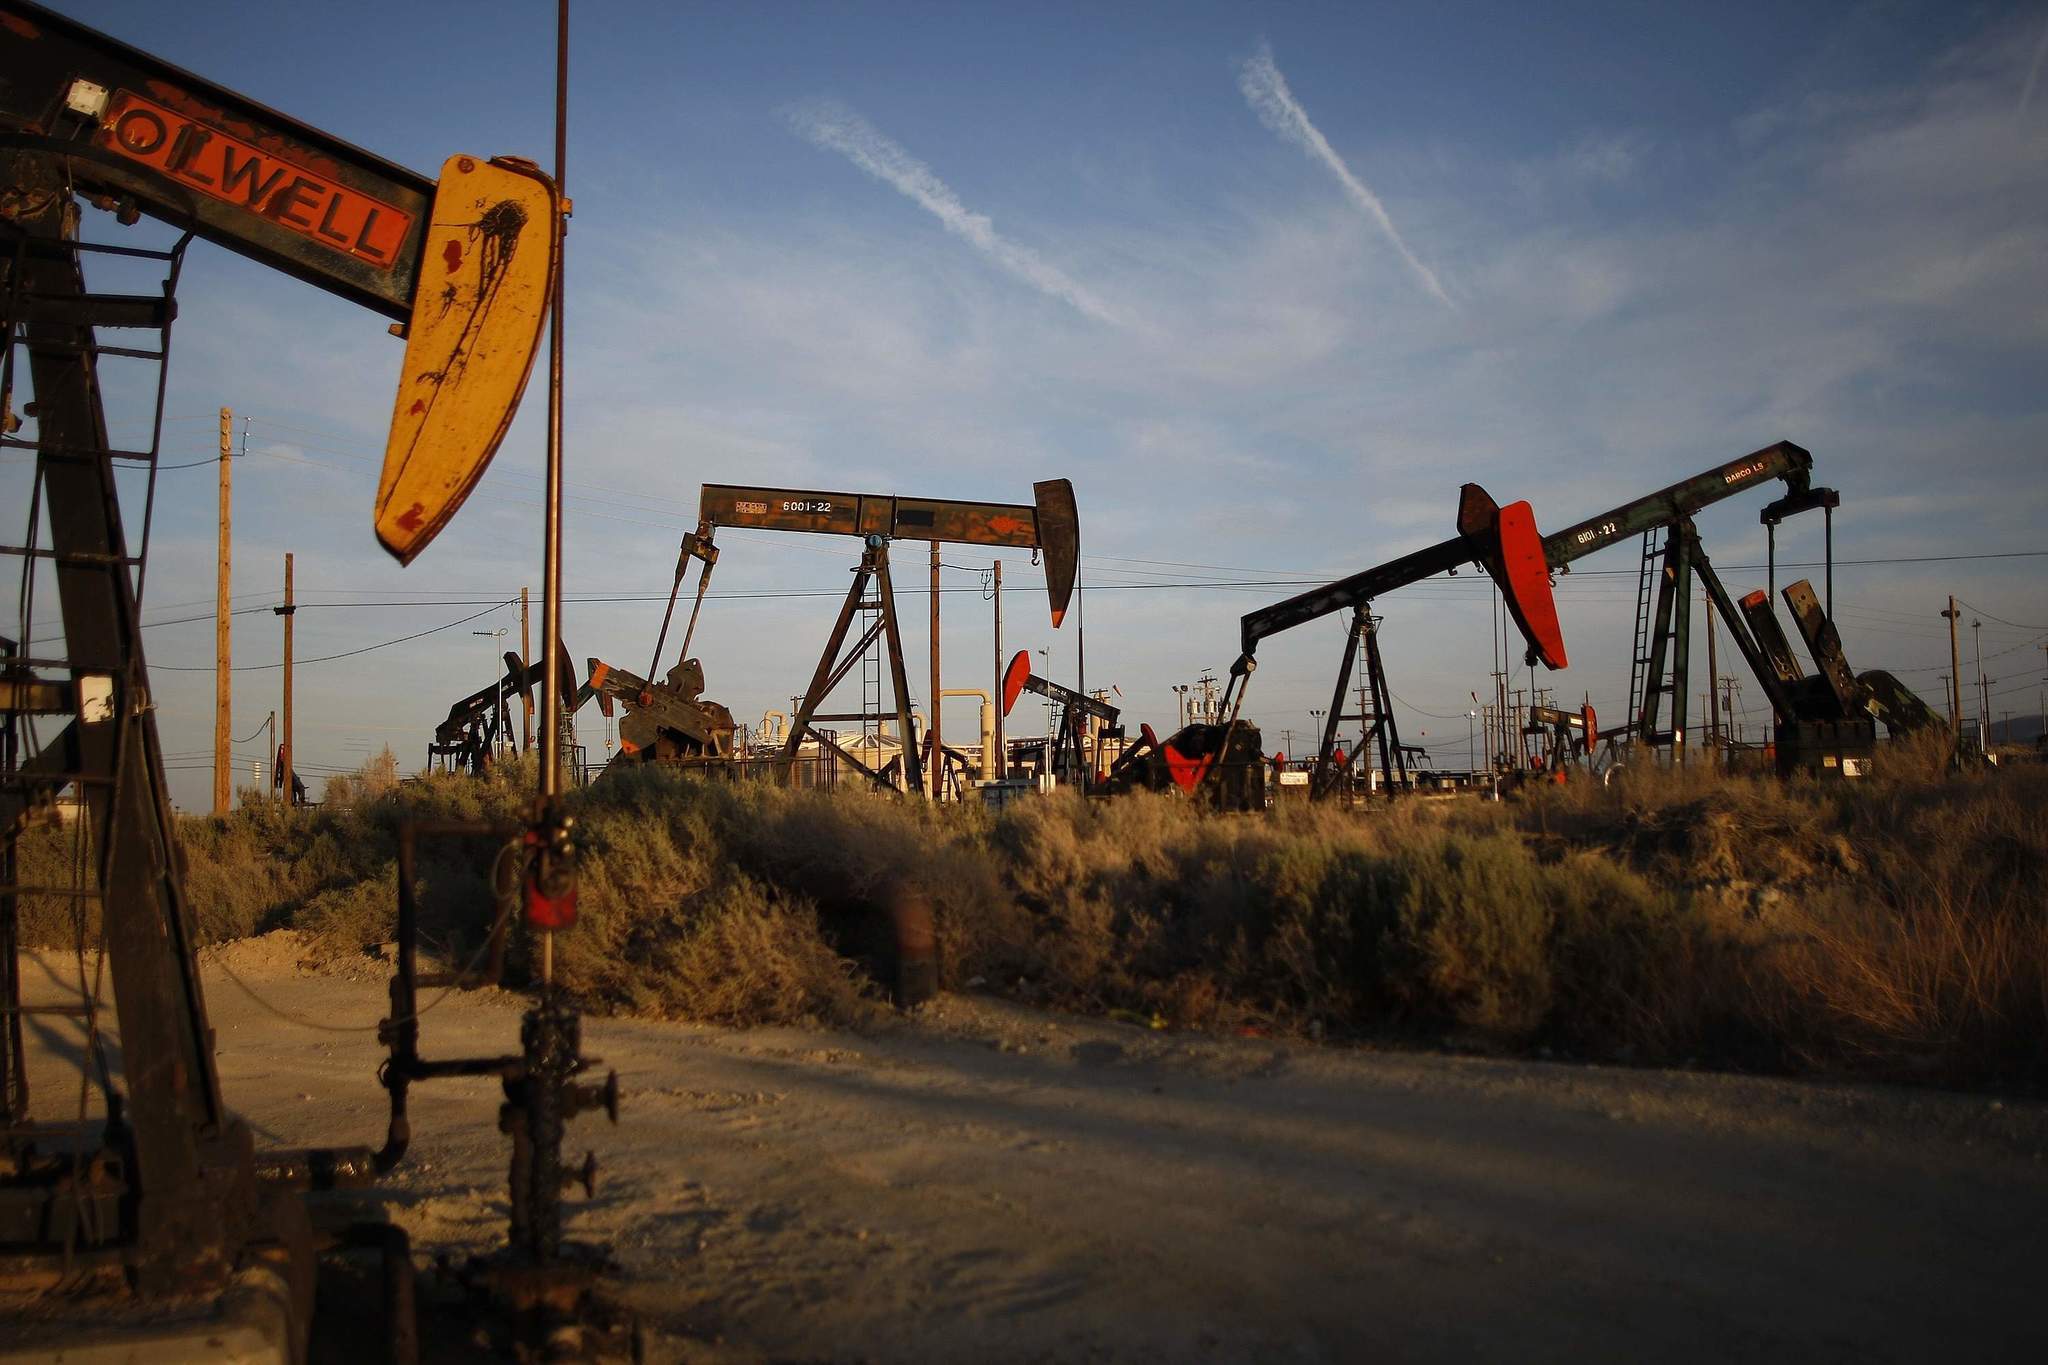 Welcome news on proposed fracking ban | Editorial - Sun Sentinel2048 x 1365